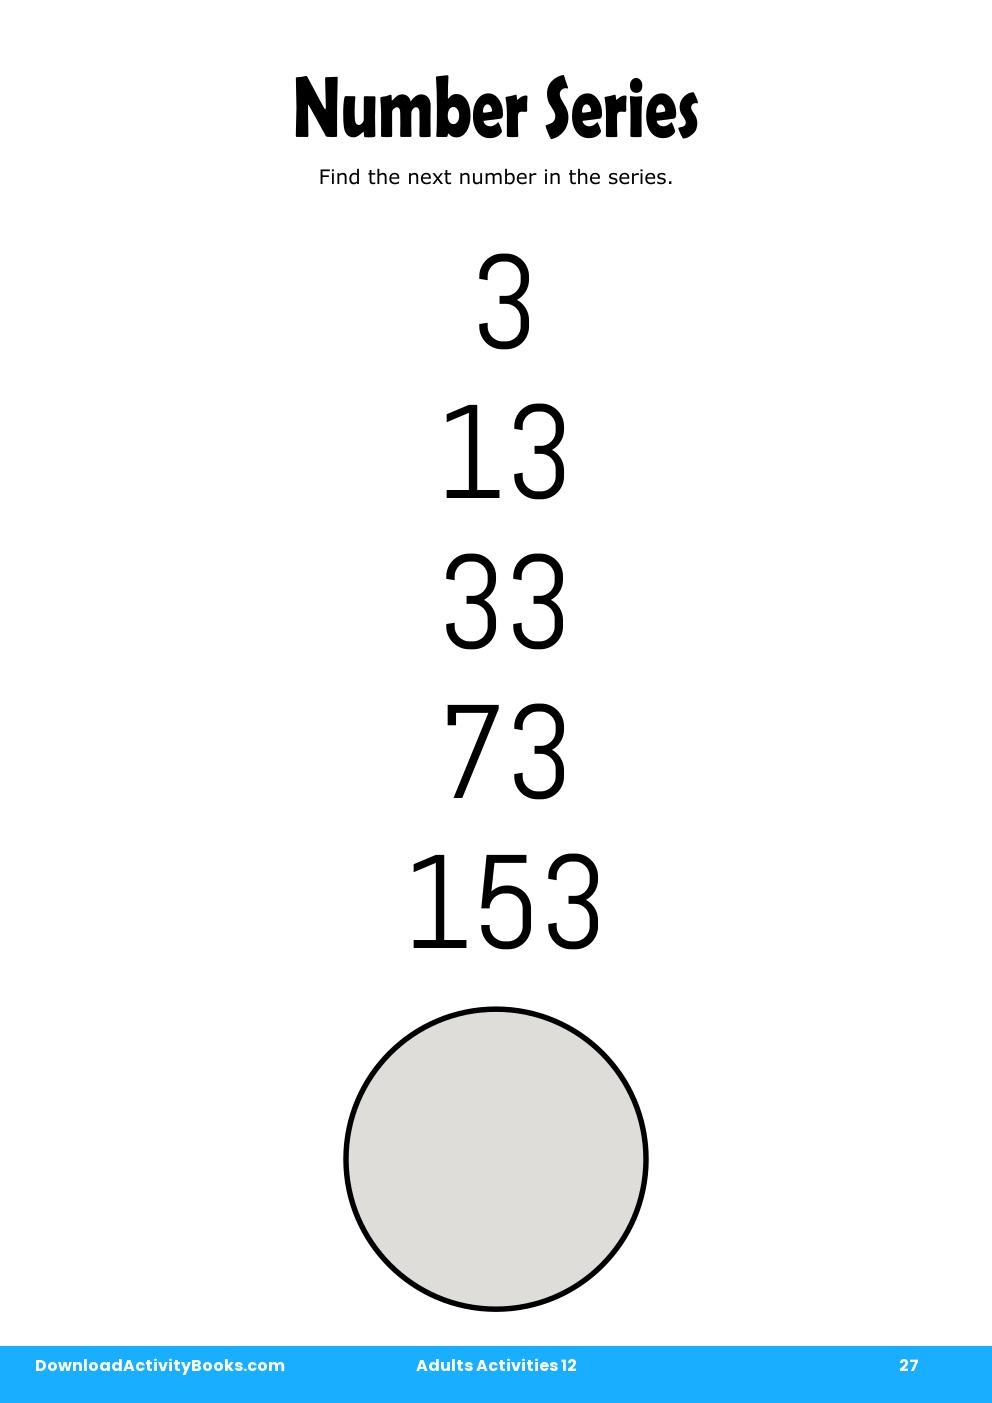 Number Series in Adults Activities 12